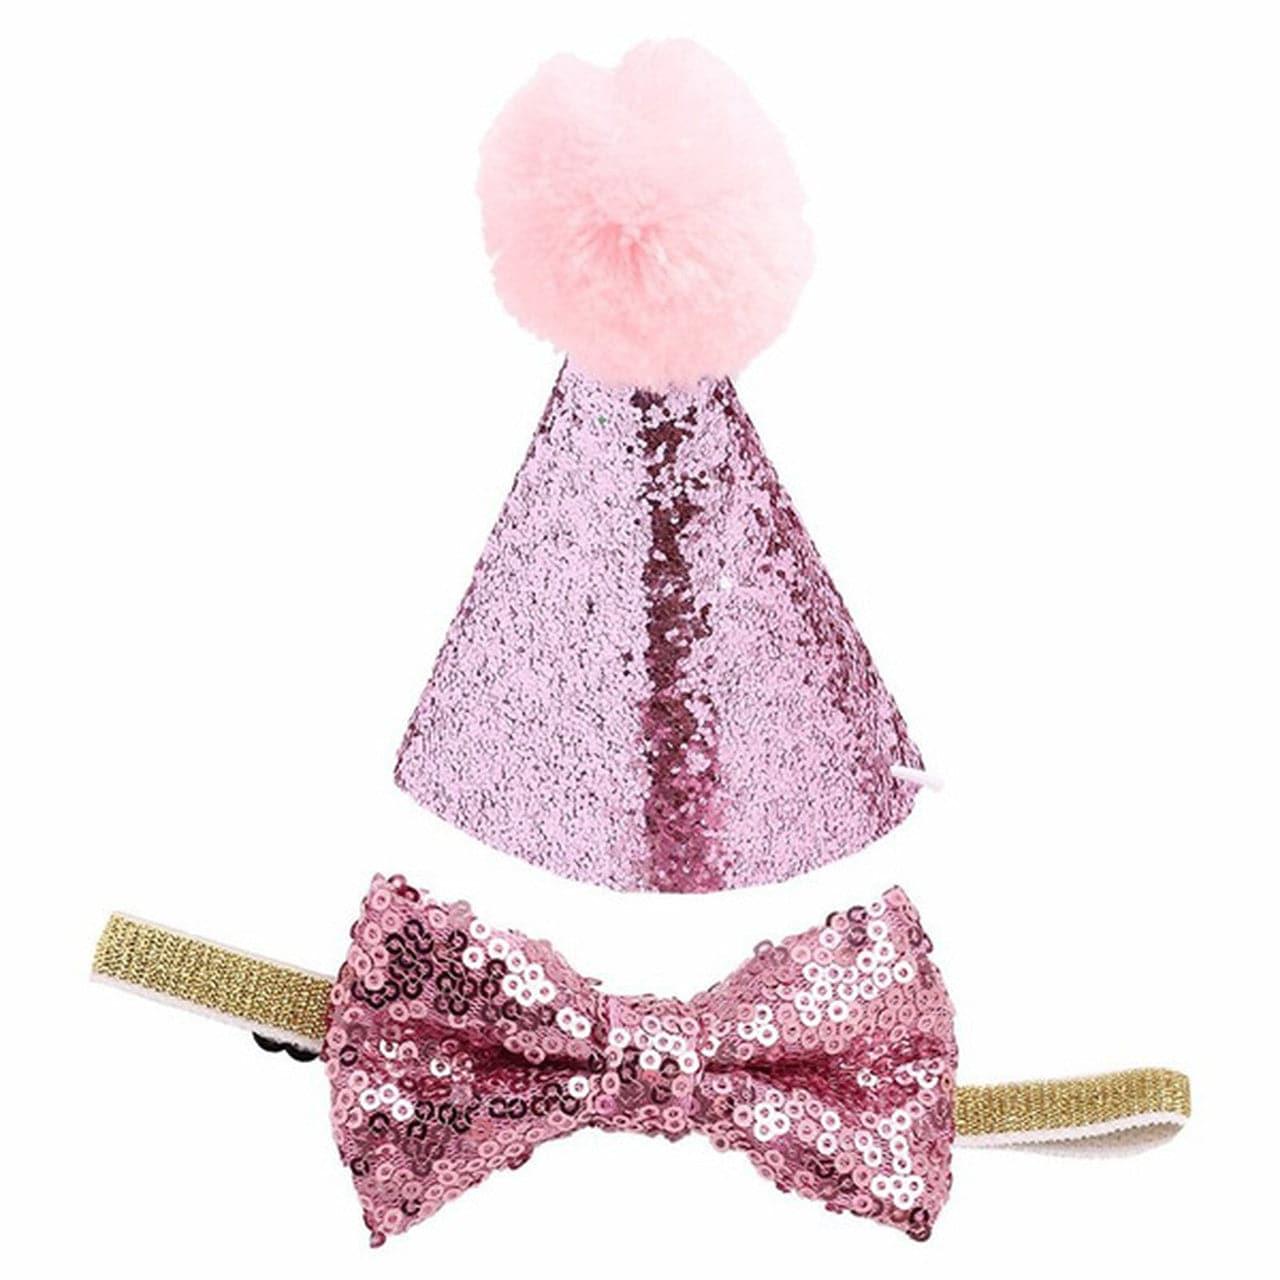 Glitter Party Hat with Bow Tie Pink - The Dog Shop Warners Bay